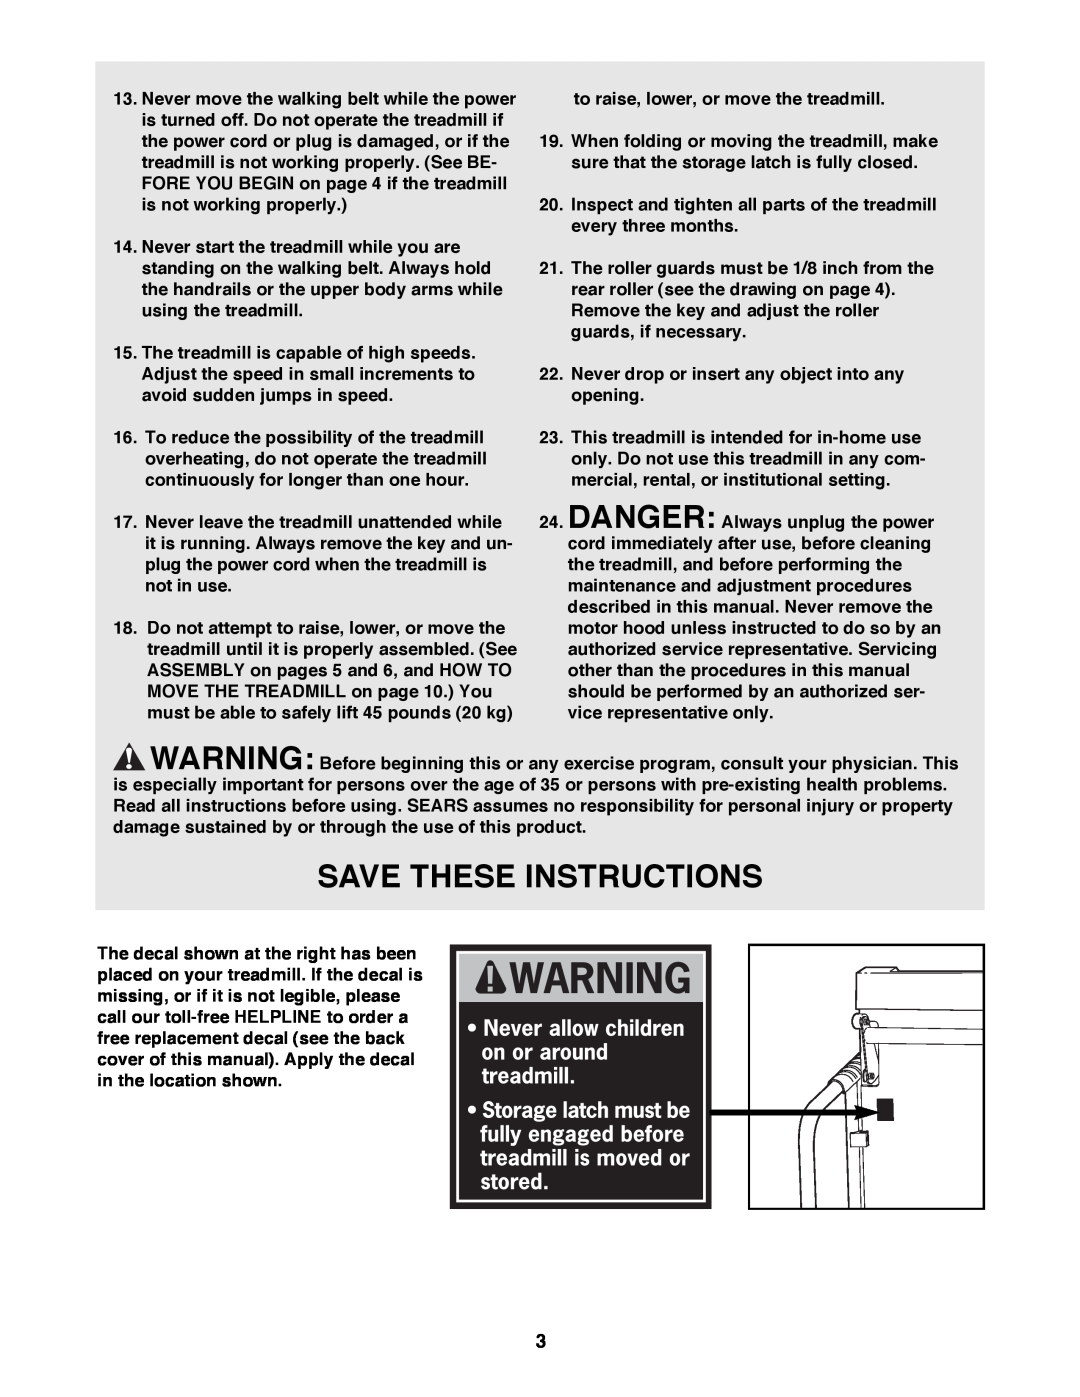 ProForm 831.298061 user manual Save These Instructions, to raise, lower, or move the treadmill 